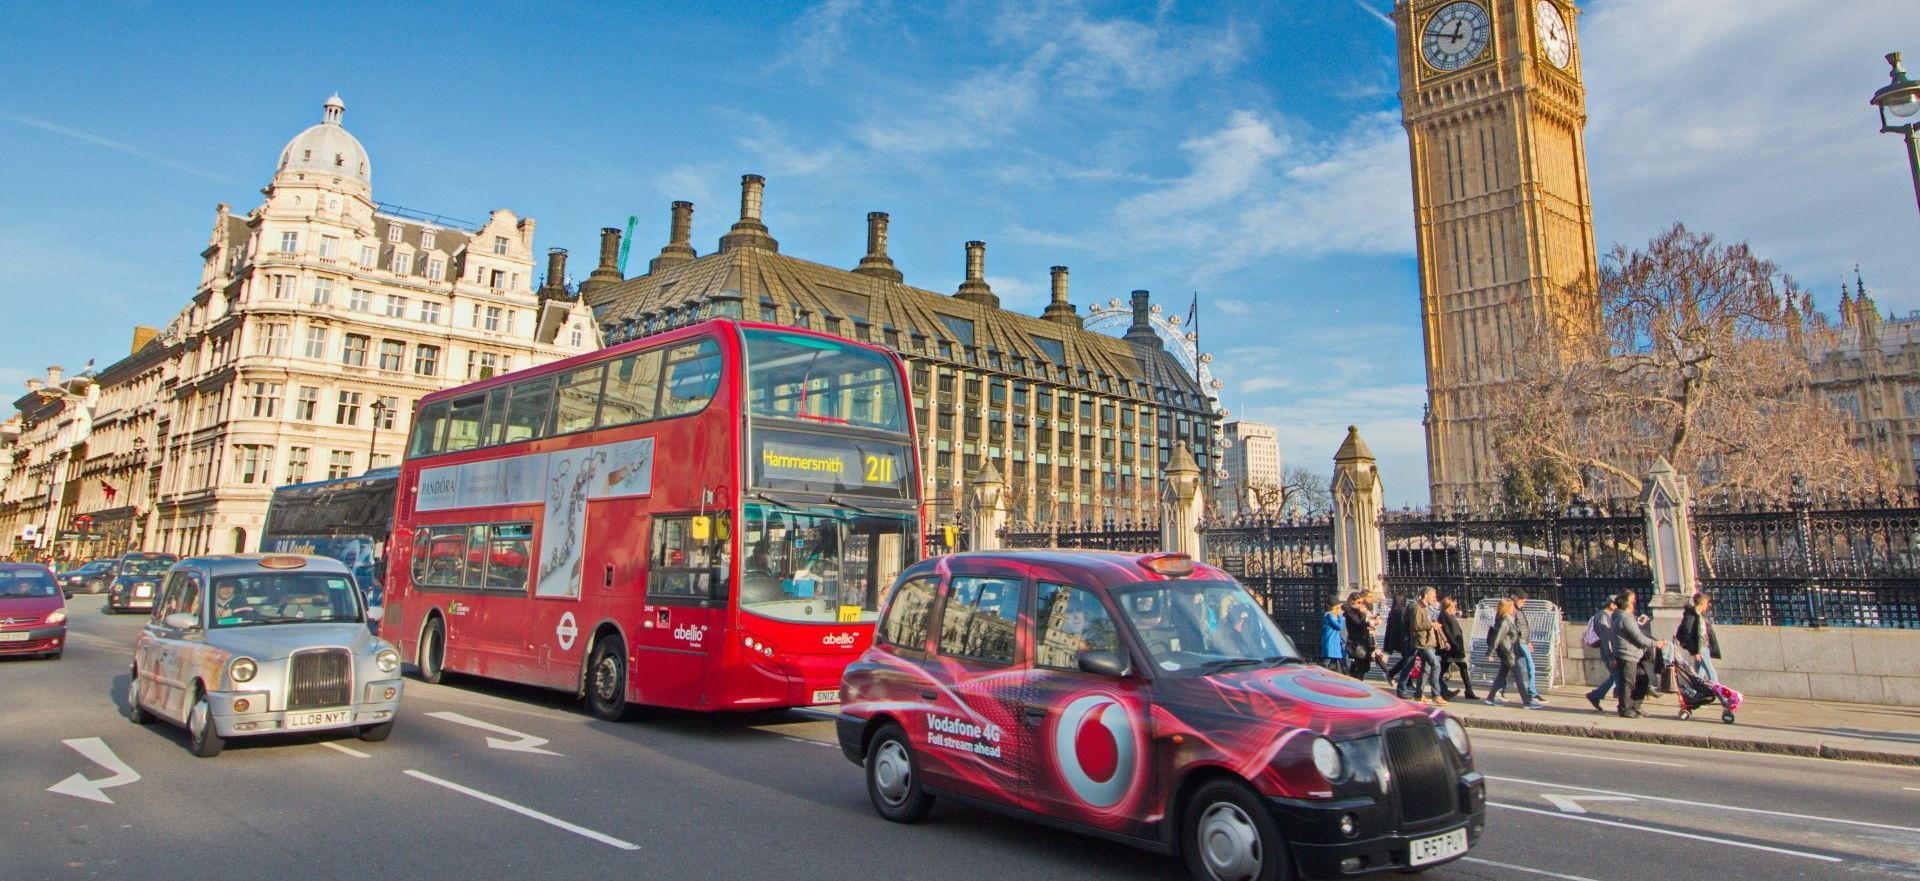 A red double decker bus and a red taxi are driving down a street in london.